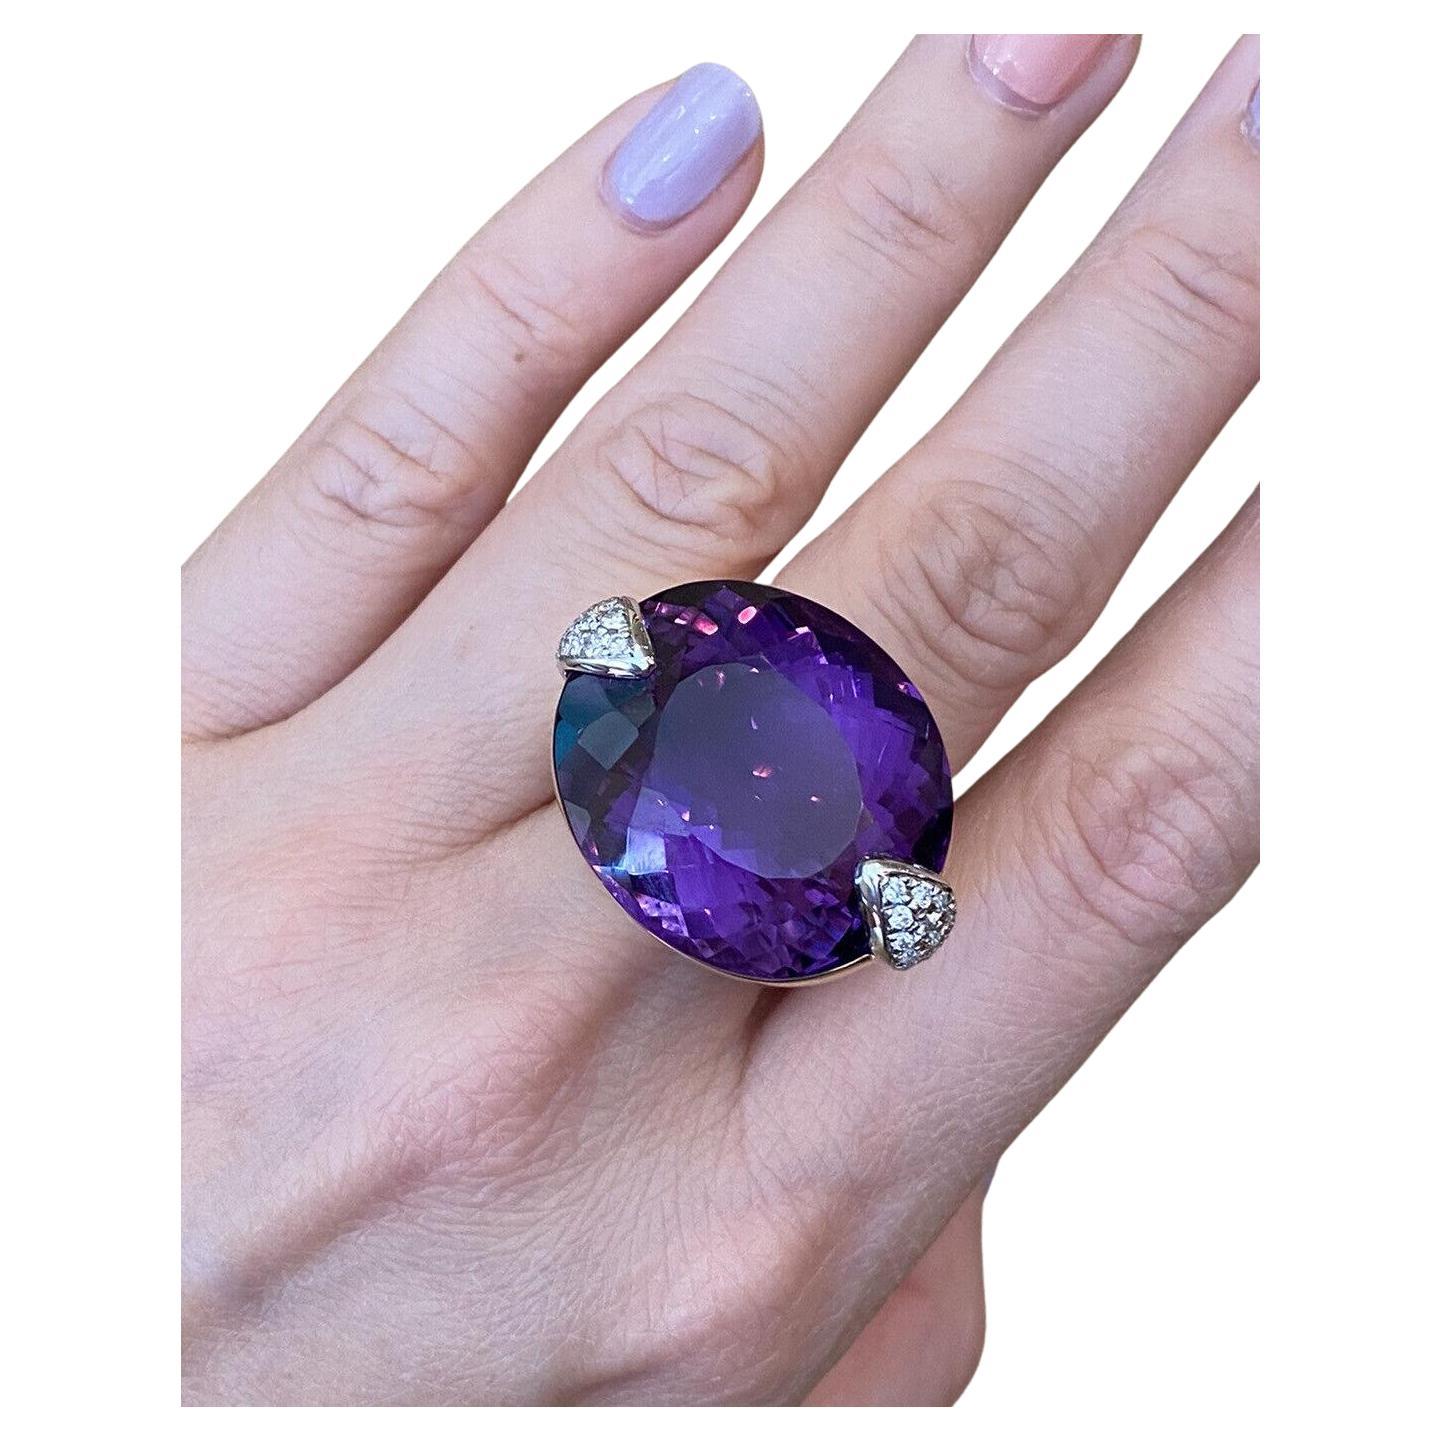 Large 54.03 carats Amethyst and Diamond Cocktail Ring in Platinum and 18k Gold